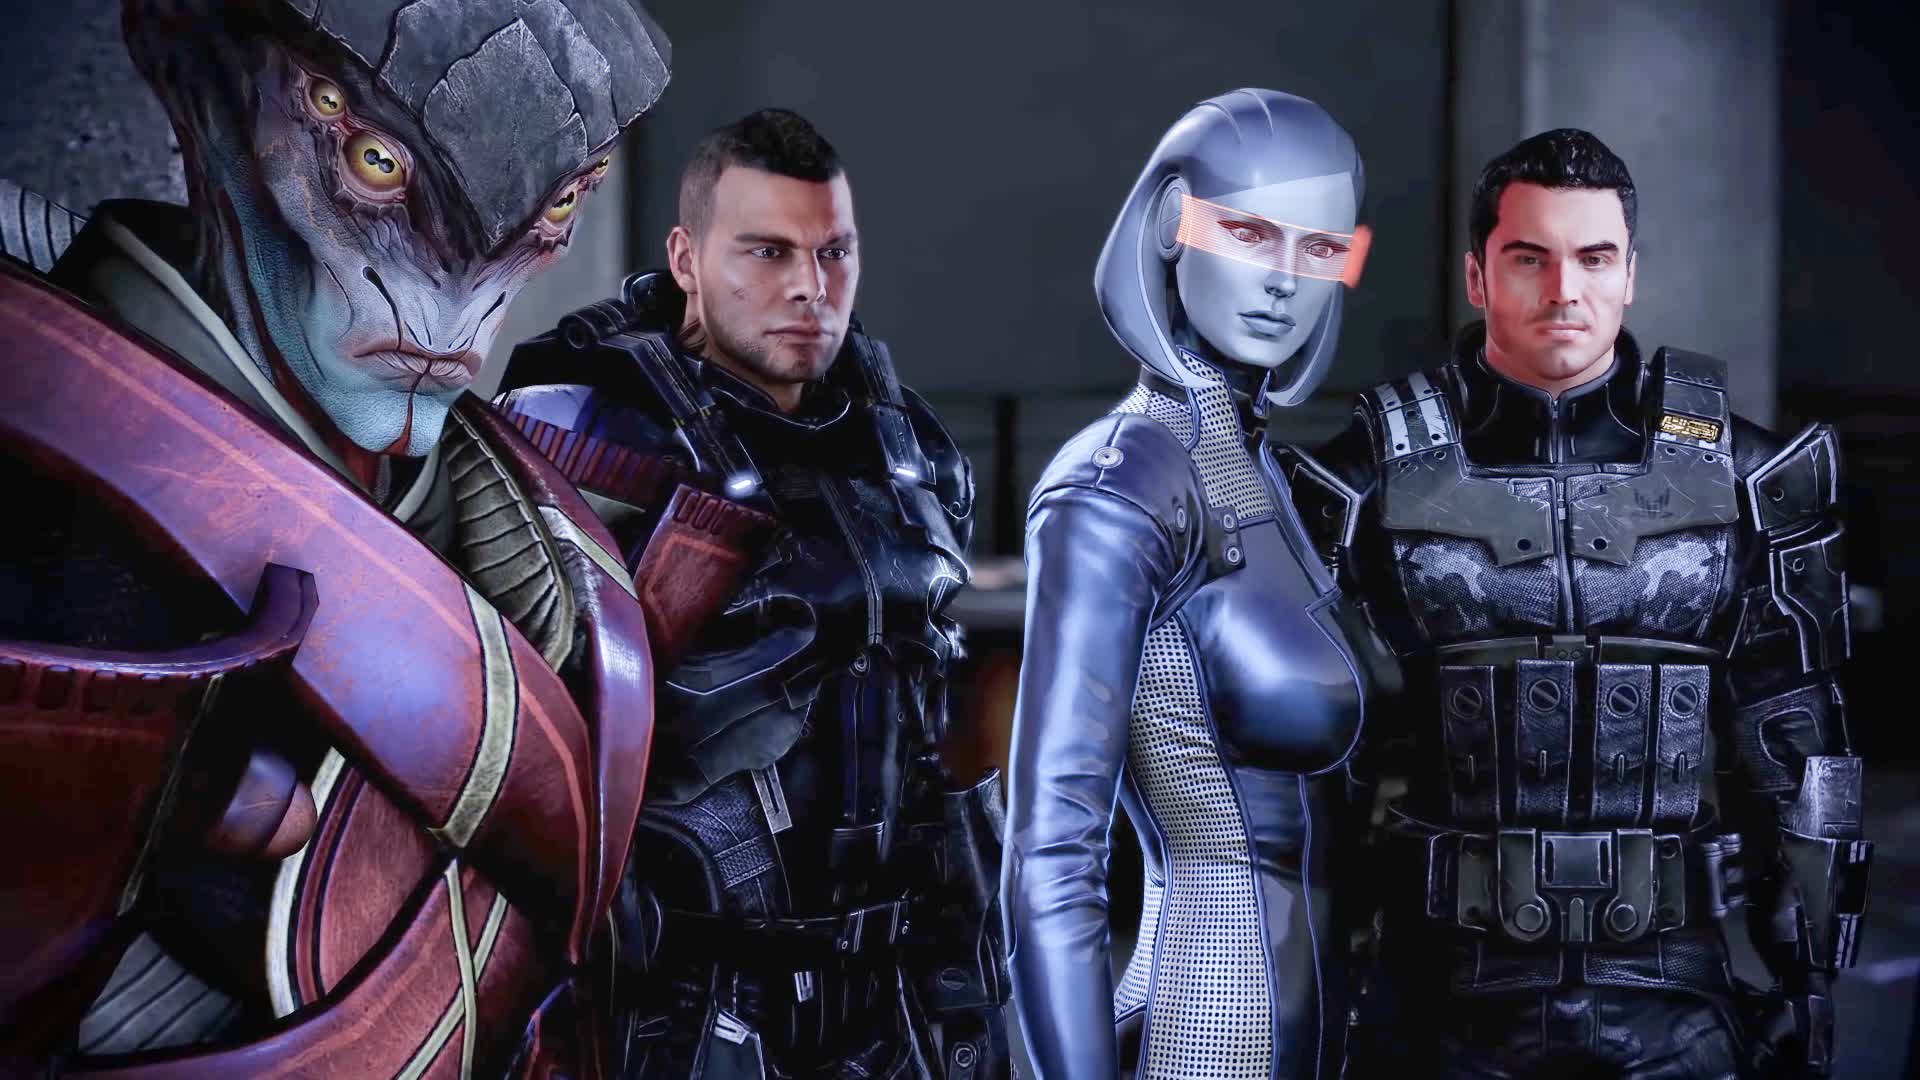 Amazon is giving away over 30 games, including Mass Effect Legendary Edition, as part of Prime Day